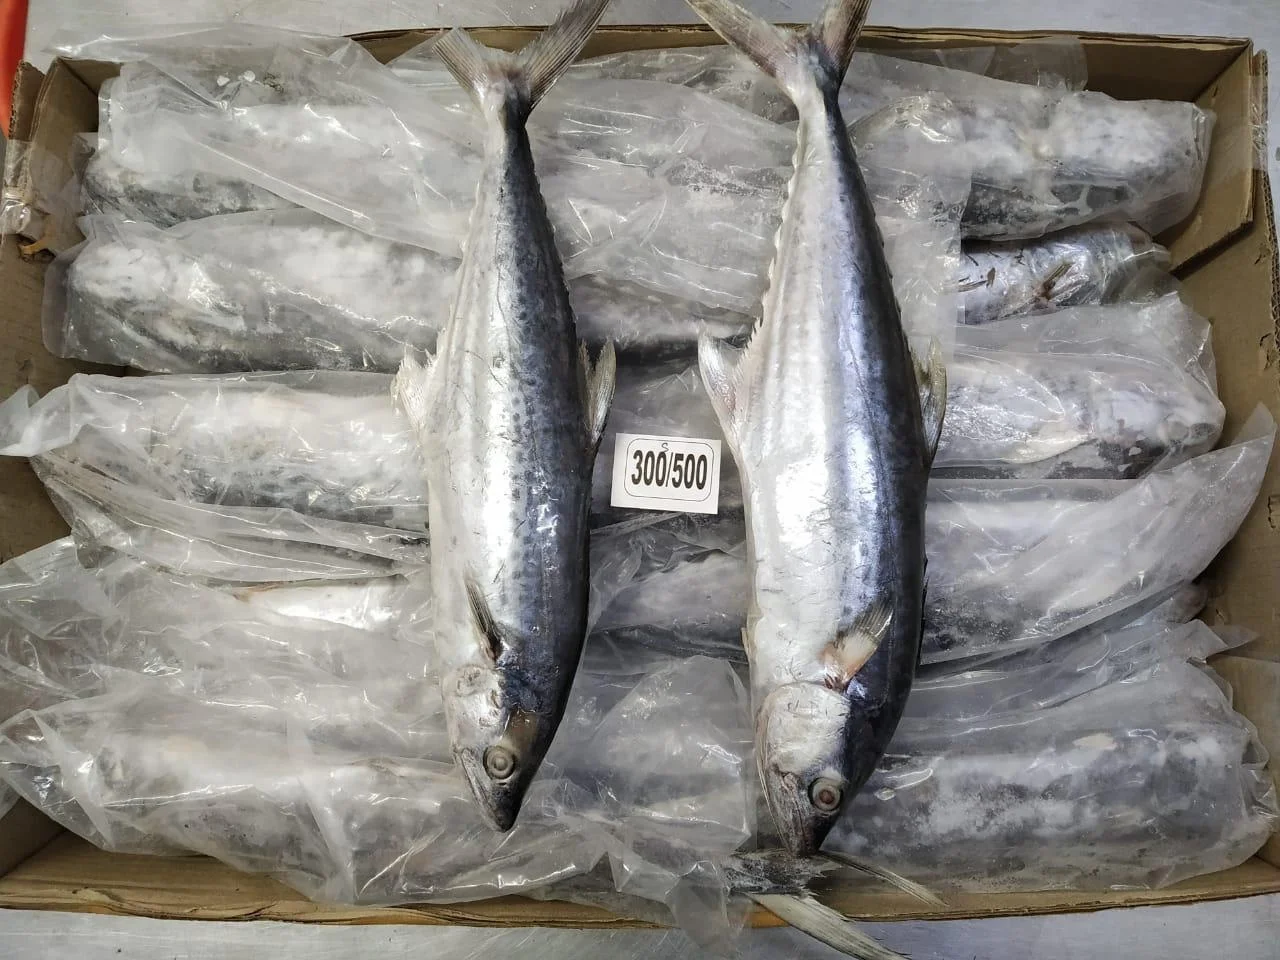 Frozen Seer fish whole from India